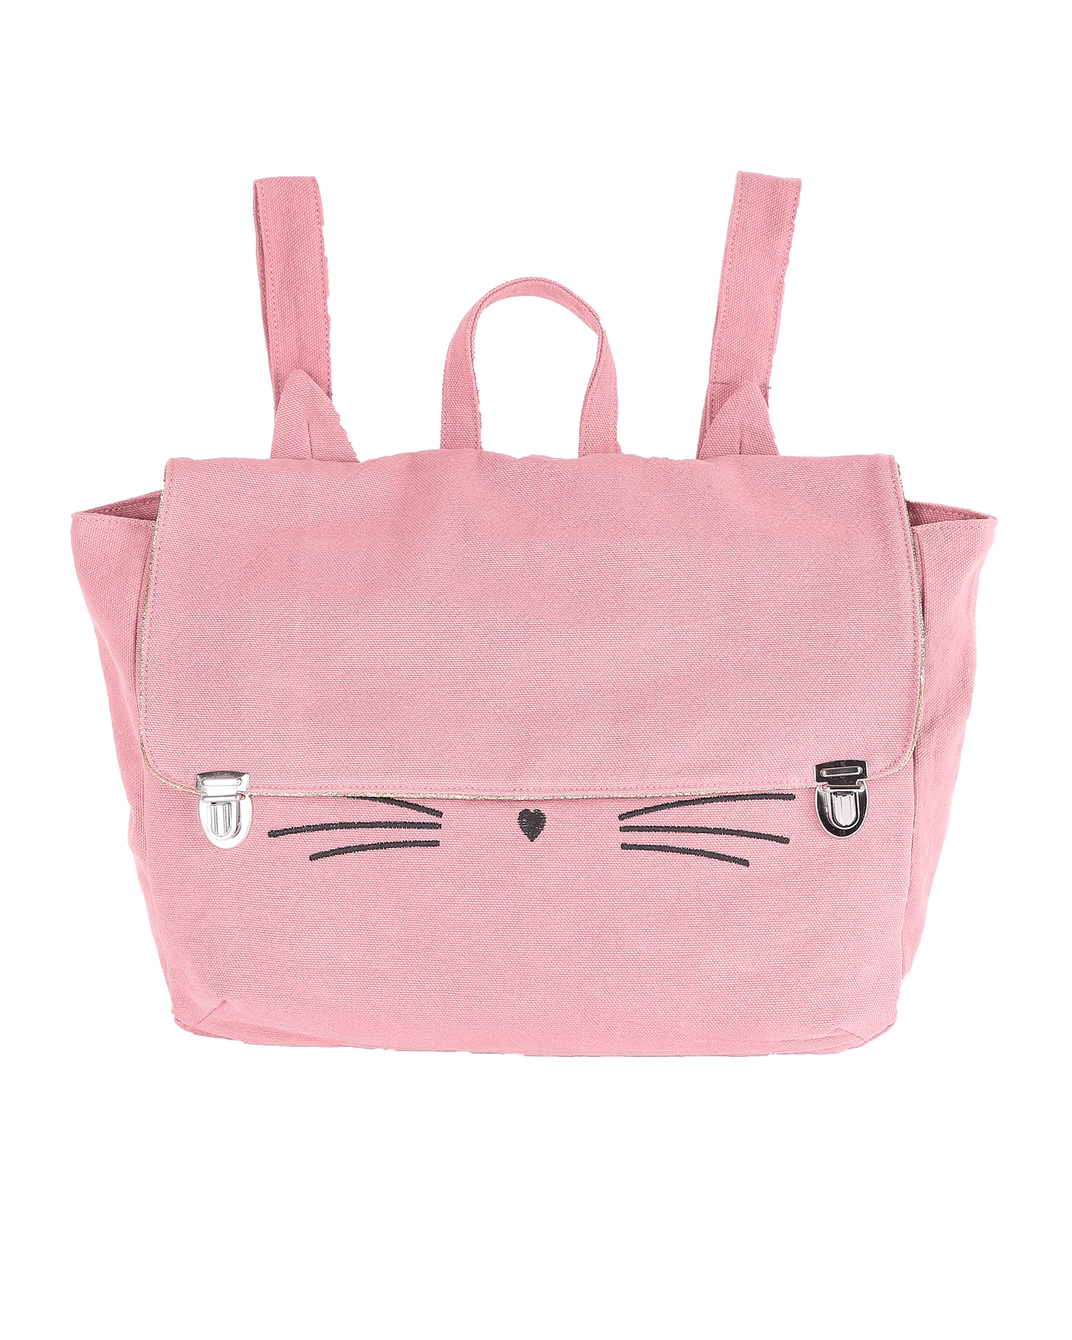 Cartable rose chat